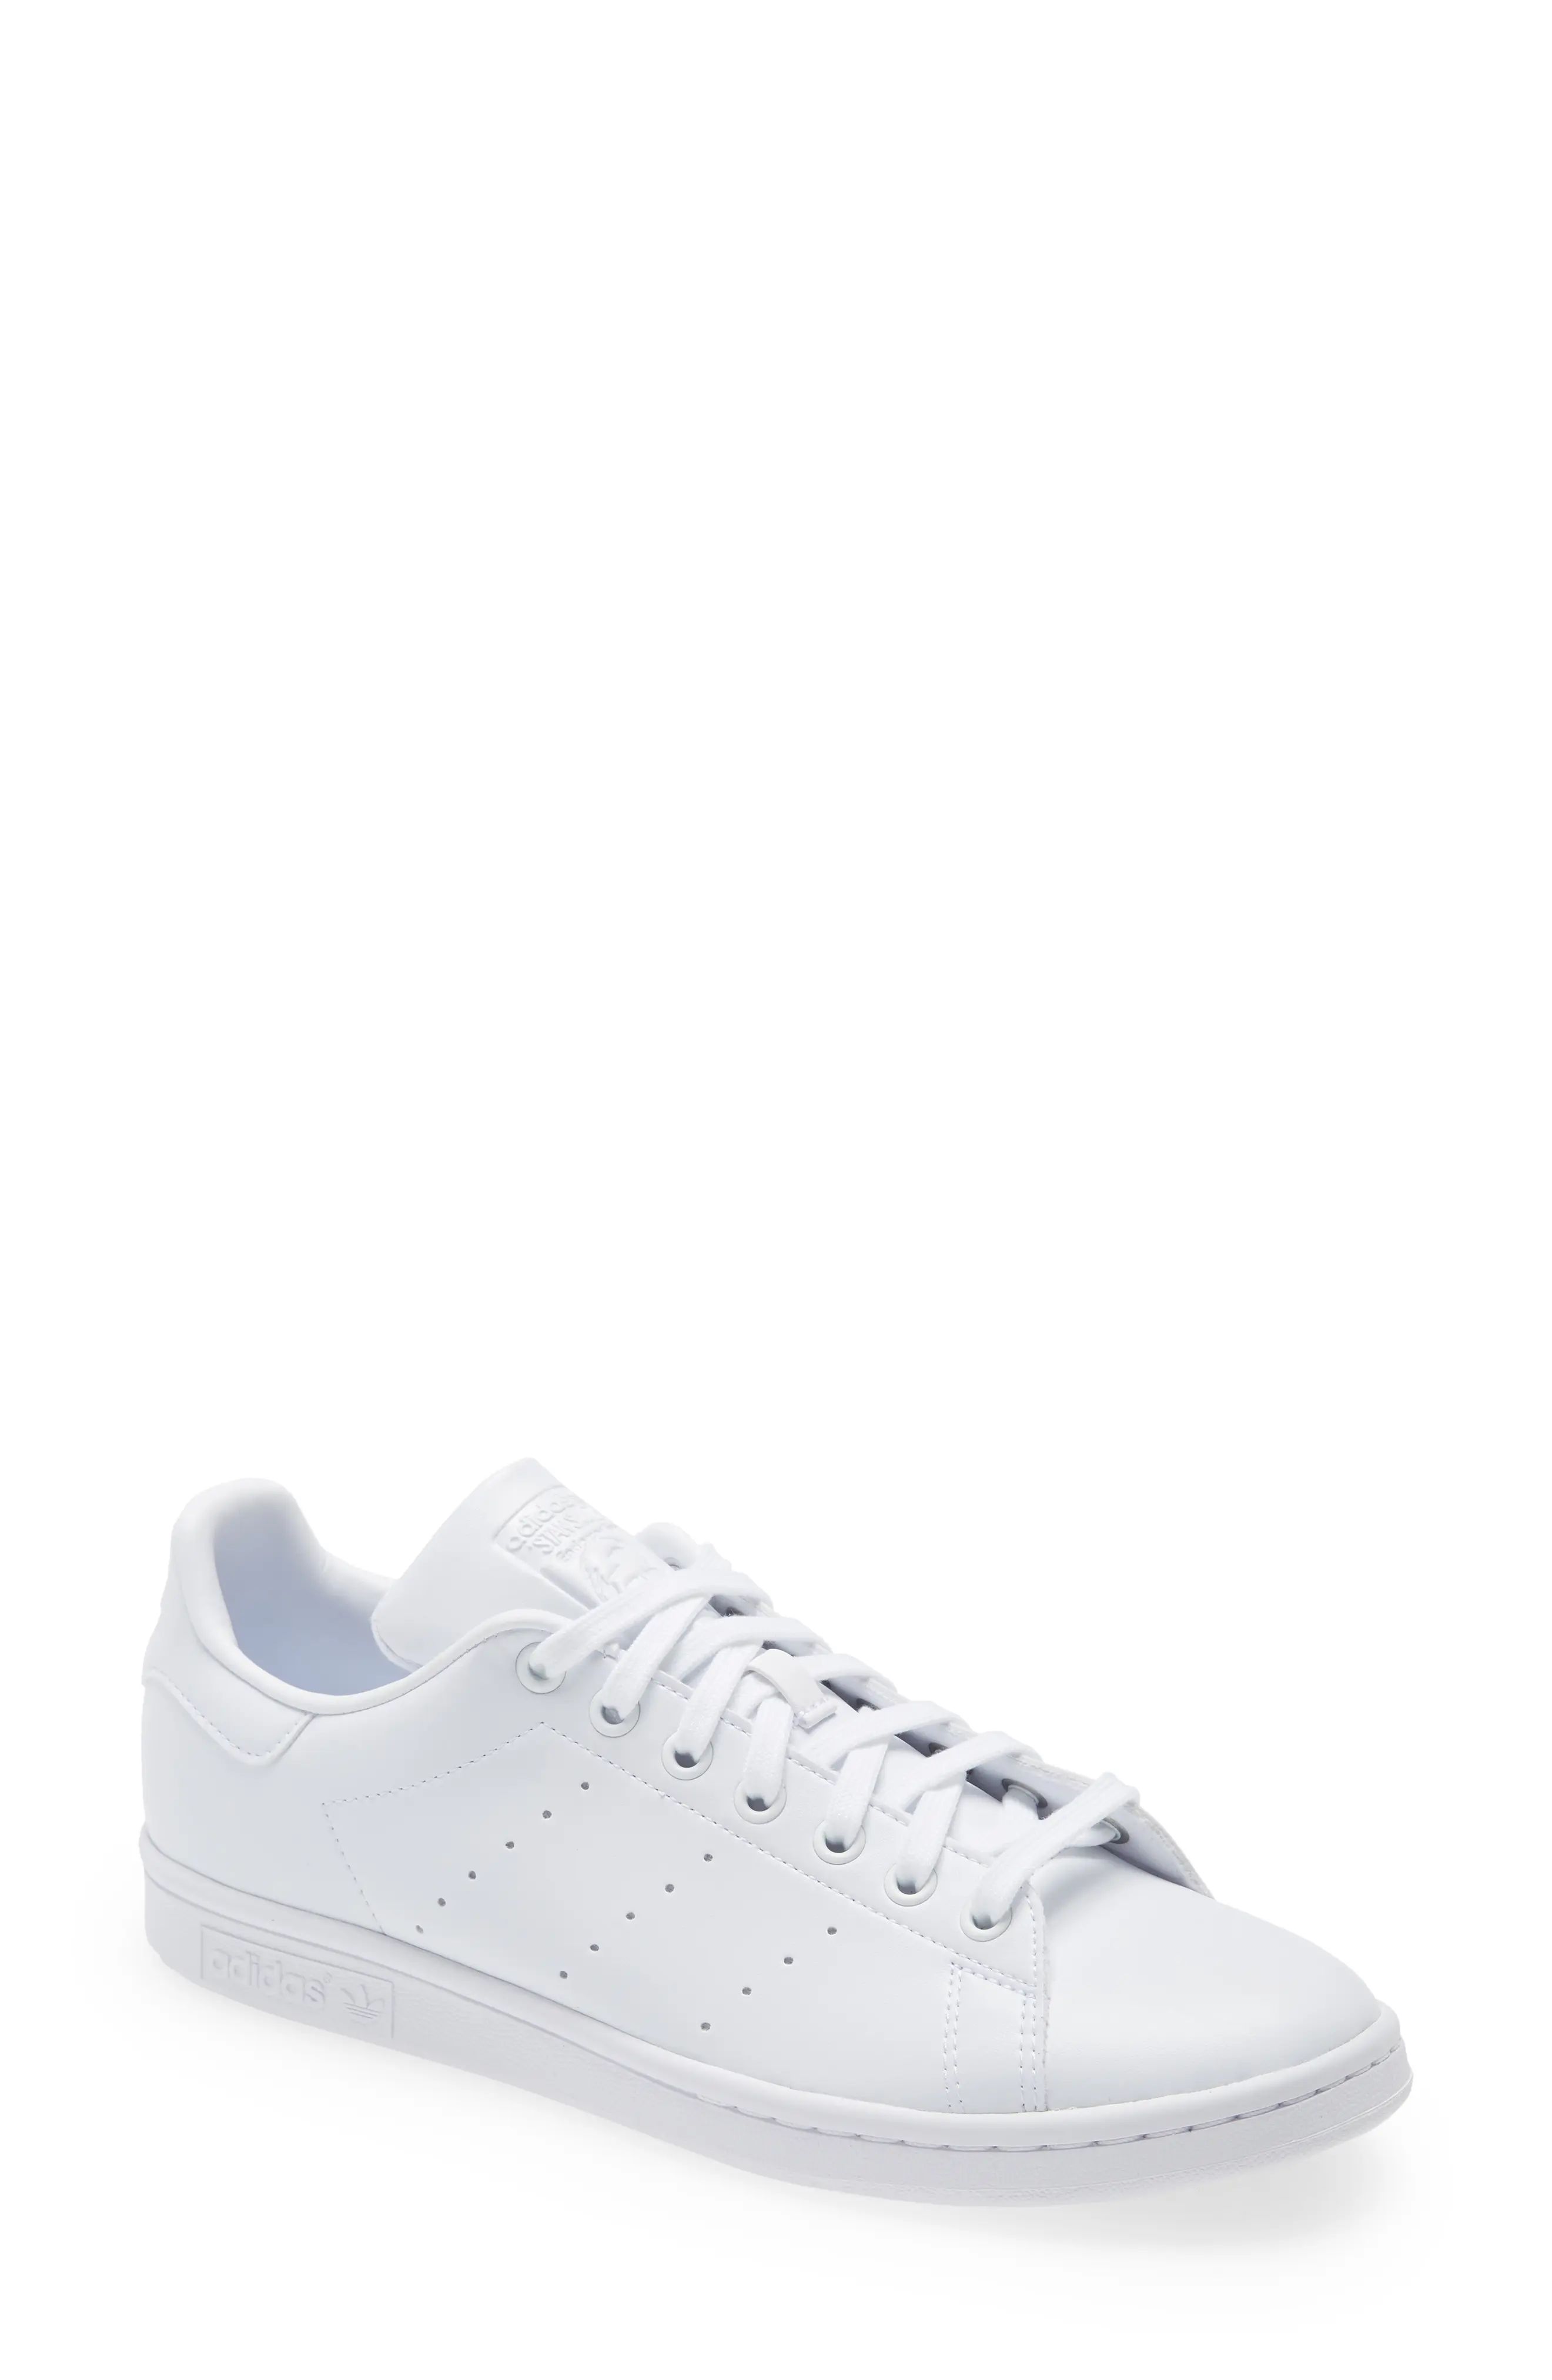 adidas Stan Smith Low Top Sneaker in White/White/Core Black at Nordstrom, Size 6 | Nordstrom